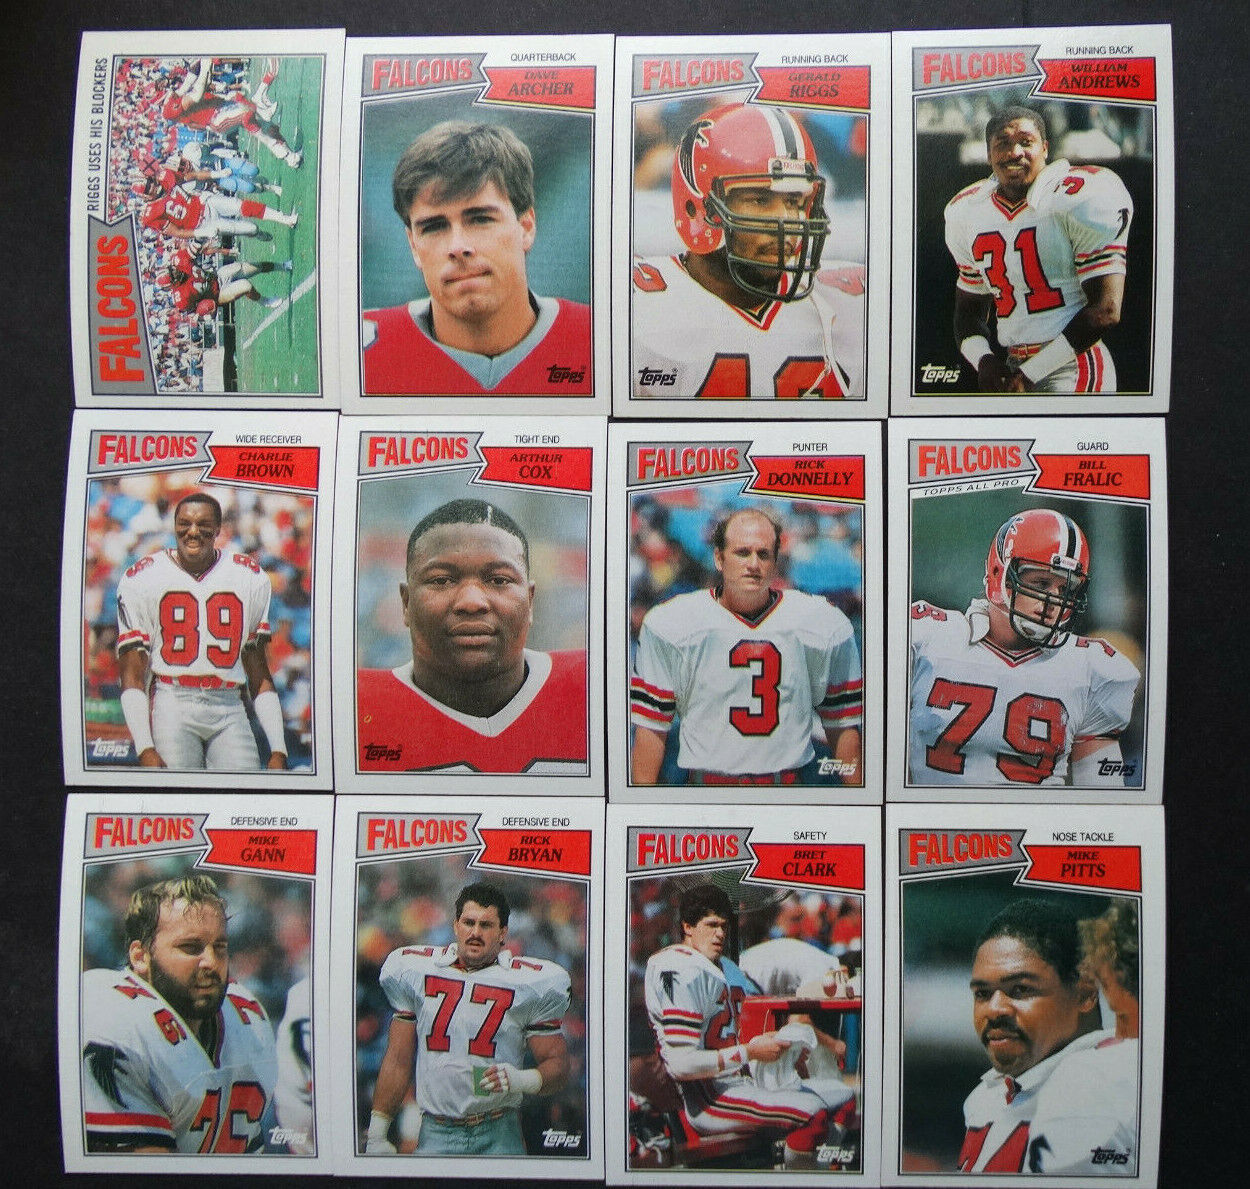 Primary image for 1987 Topps Atlanta Falcons Team Set of 12 Football Cards